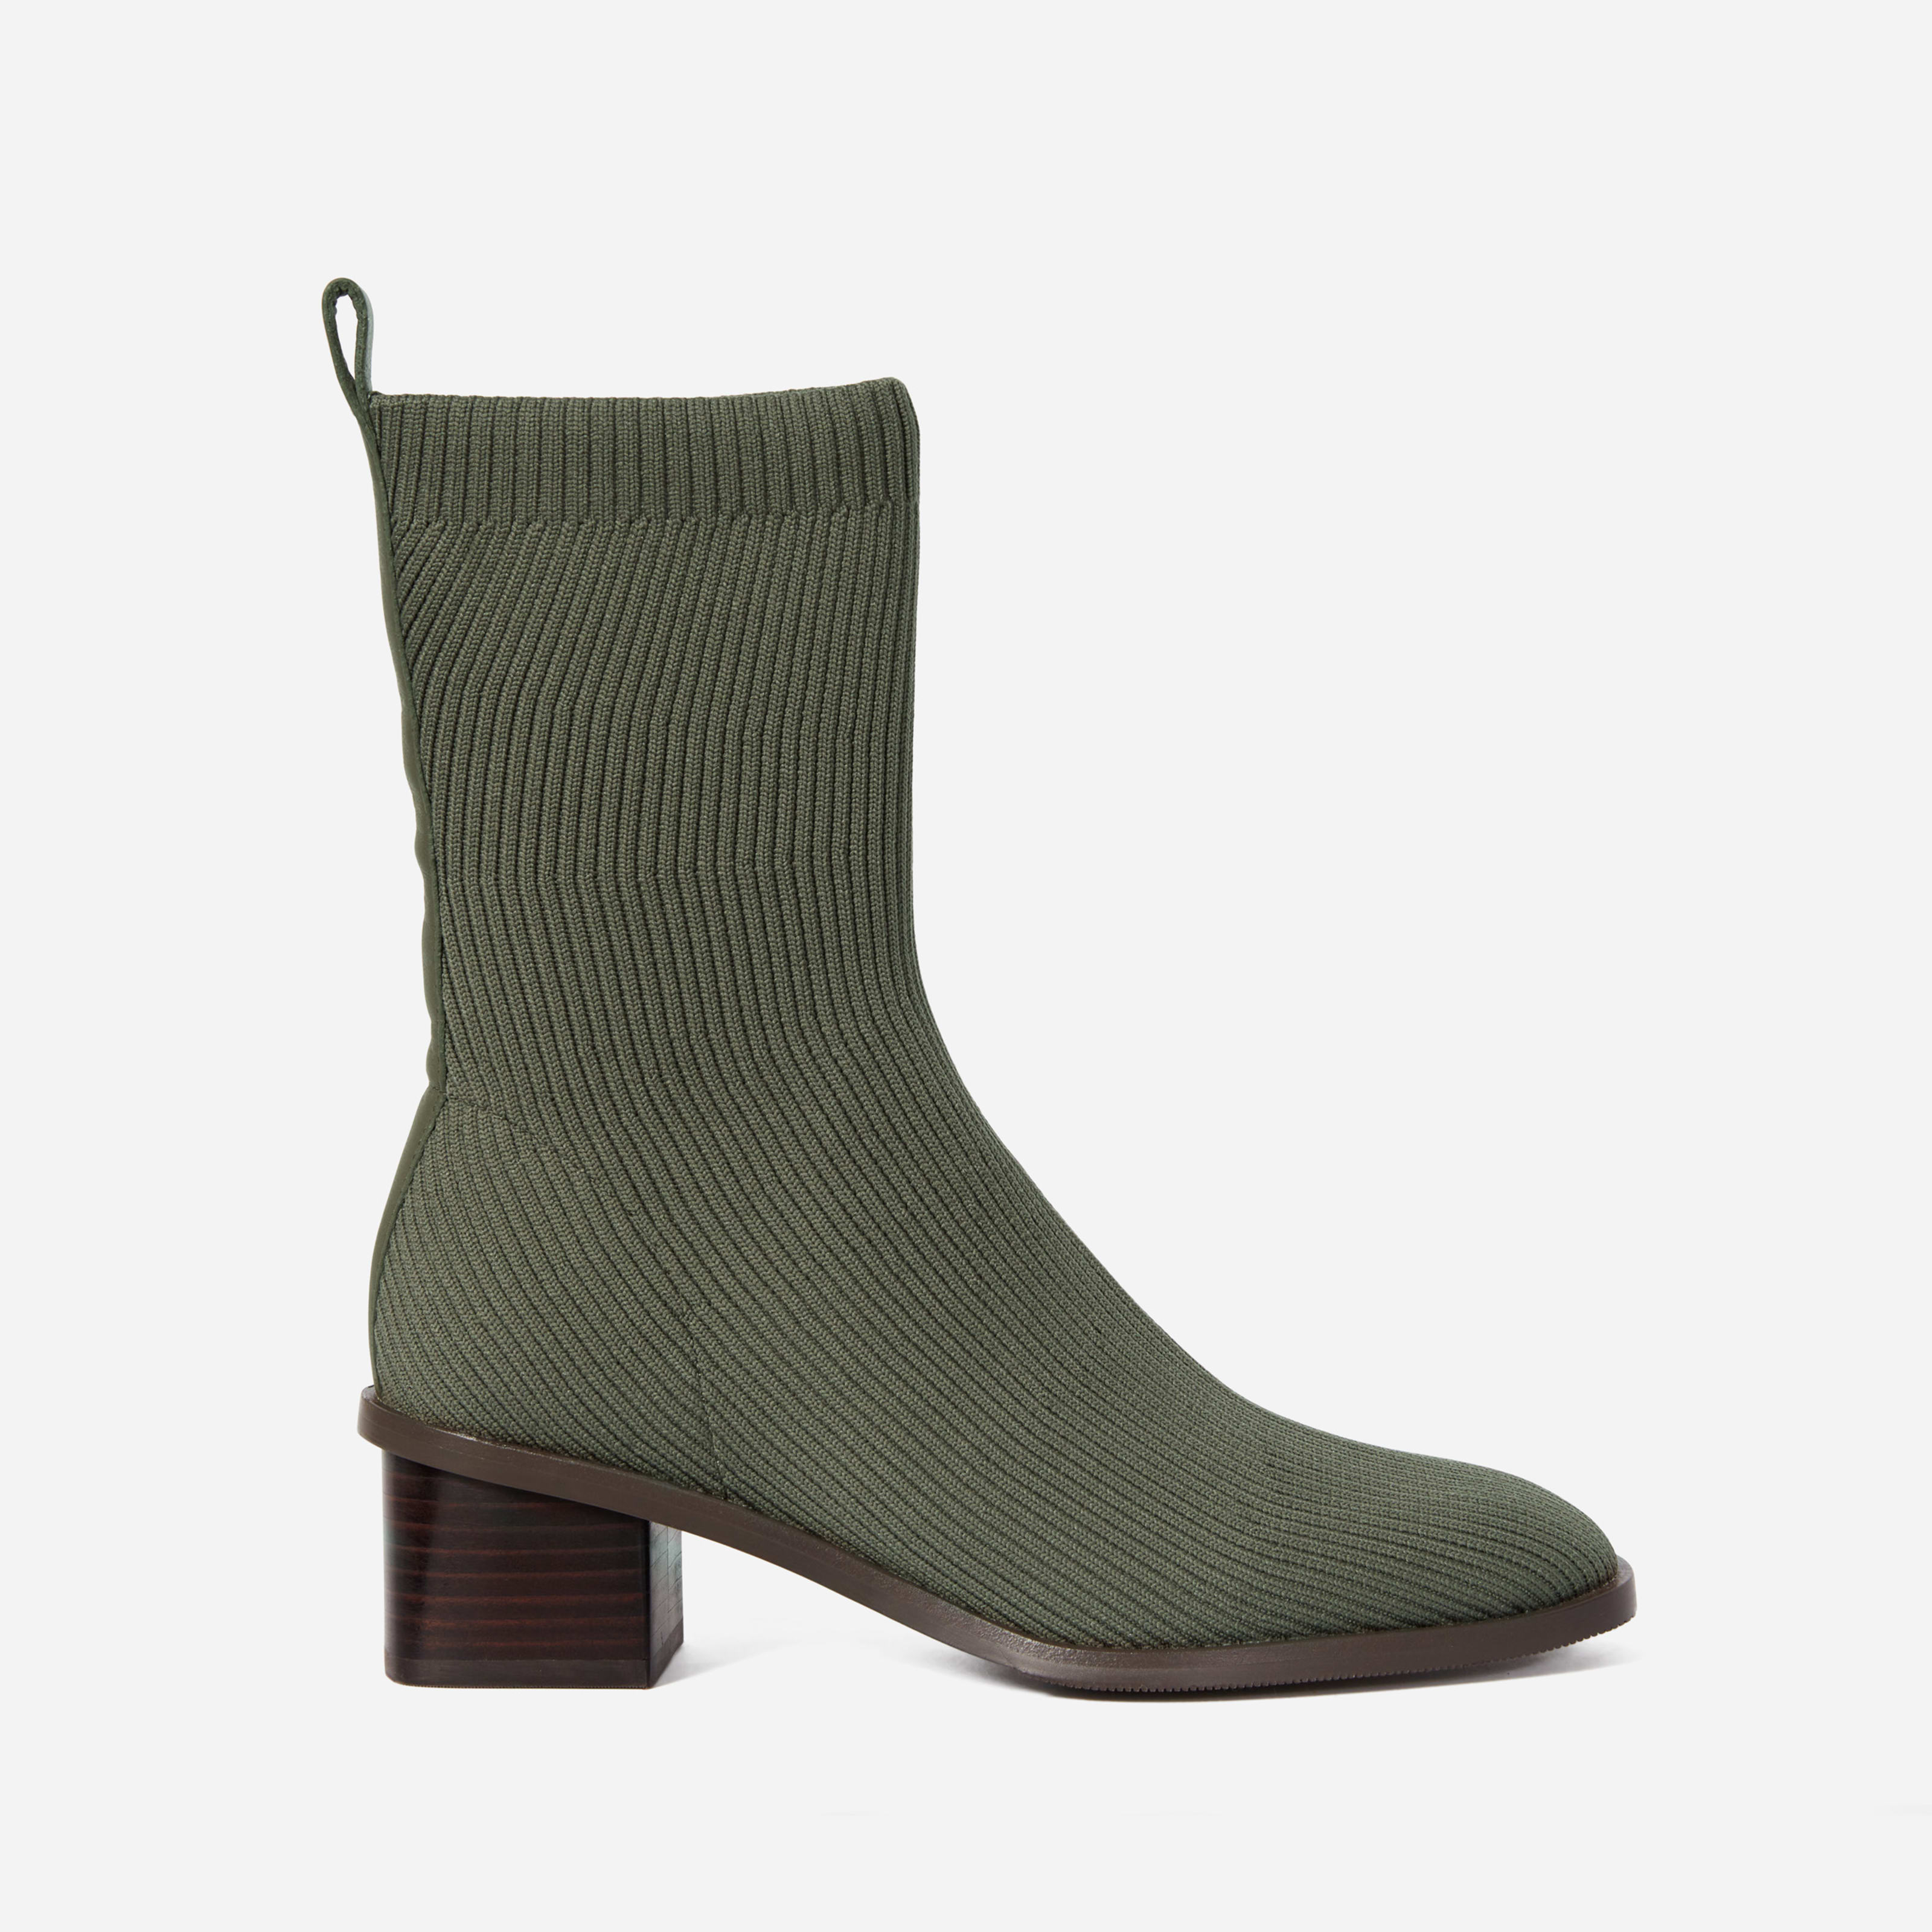 women's high-ankle glove boot in reknitâ® by everlane in caper green, size 5